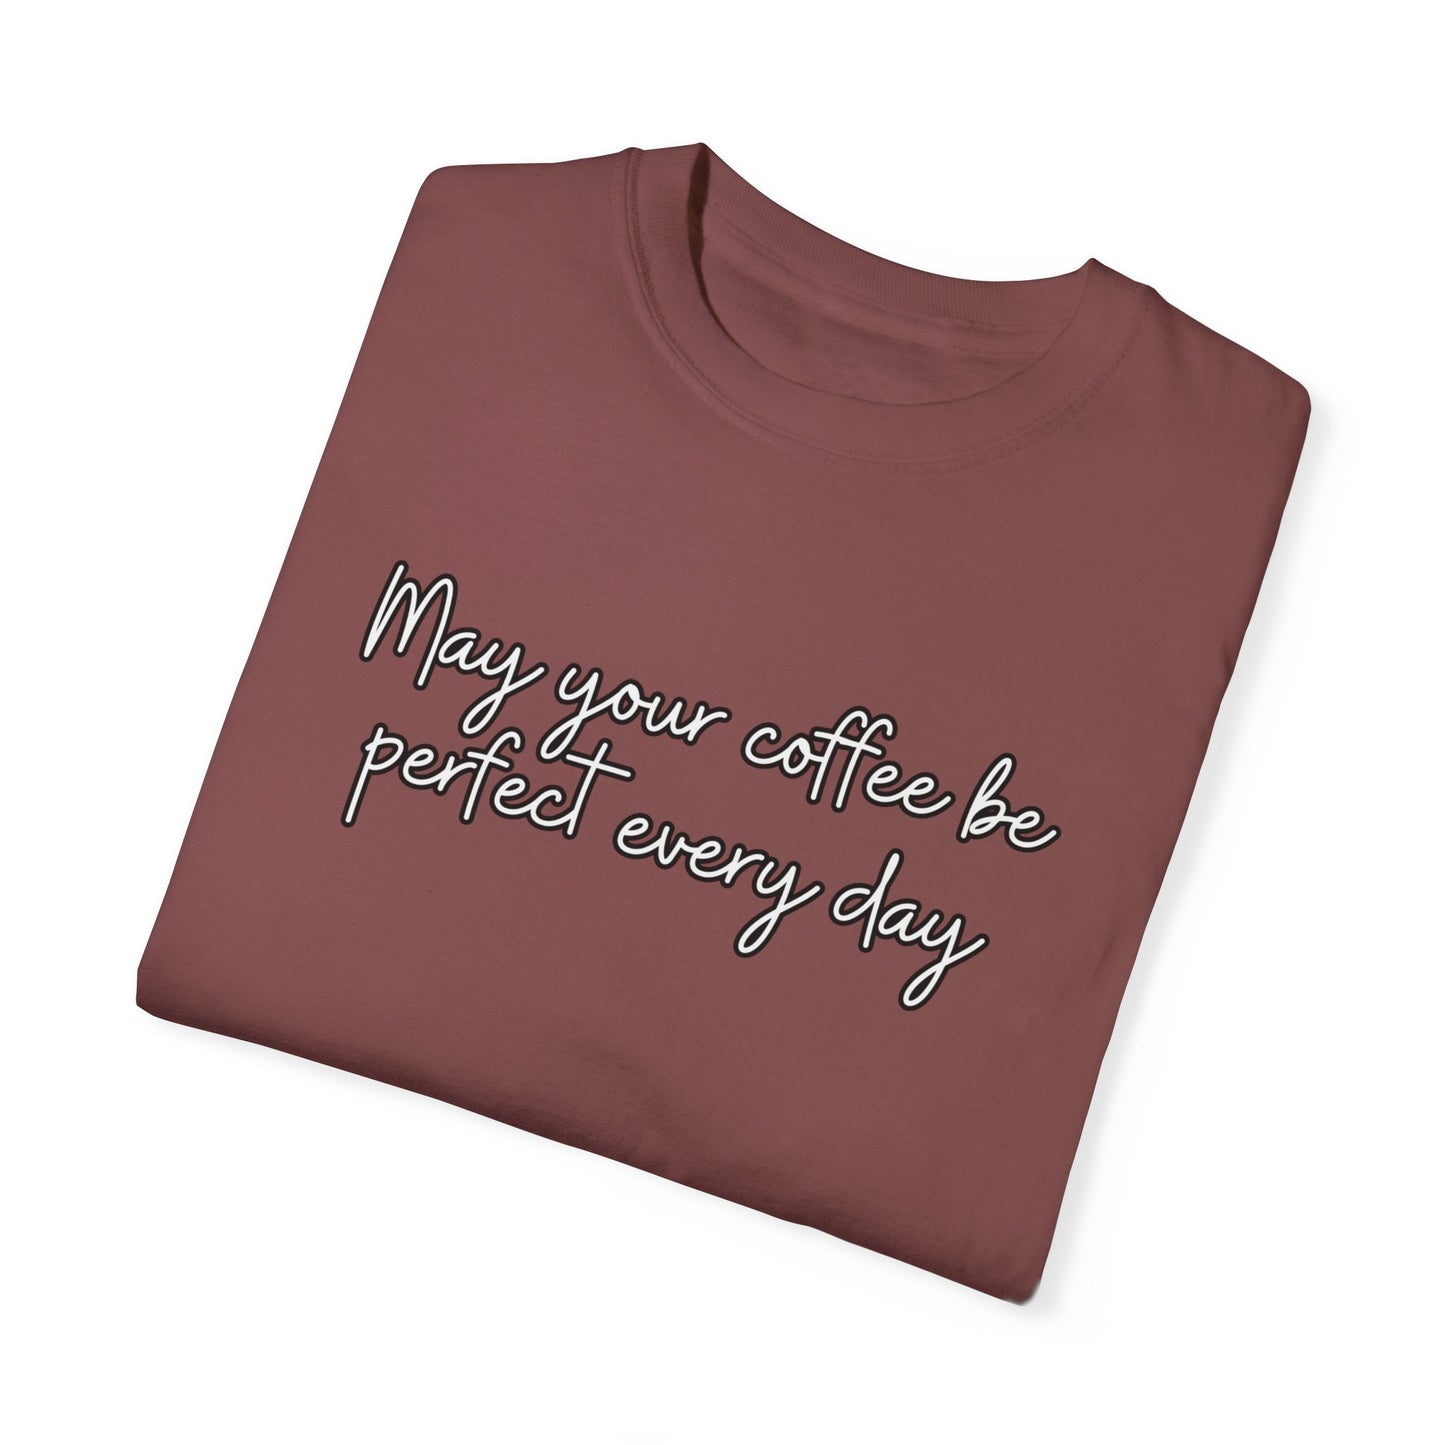 Everyday Perfection: Coffee Lovers' Women's T-Shirt for the Perfect Brew